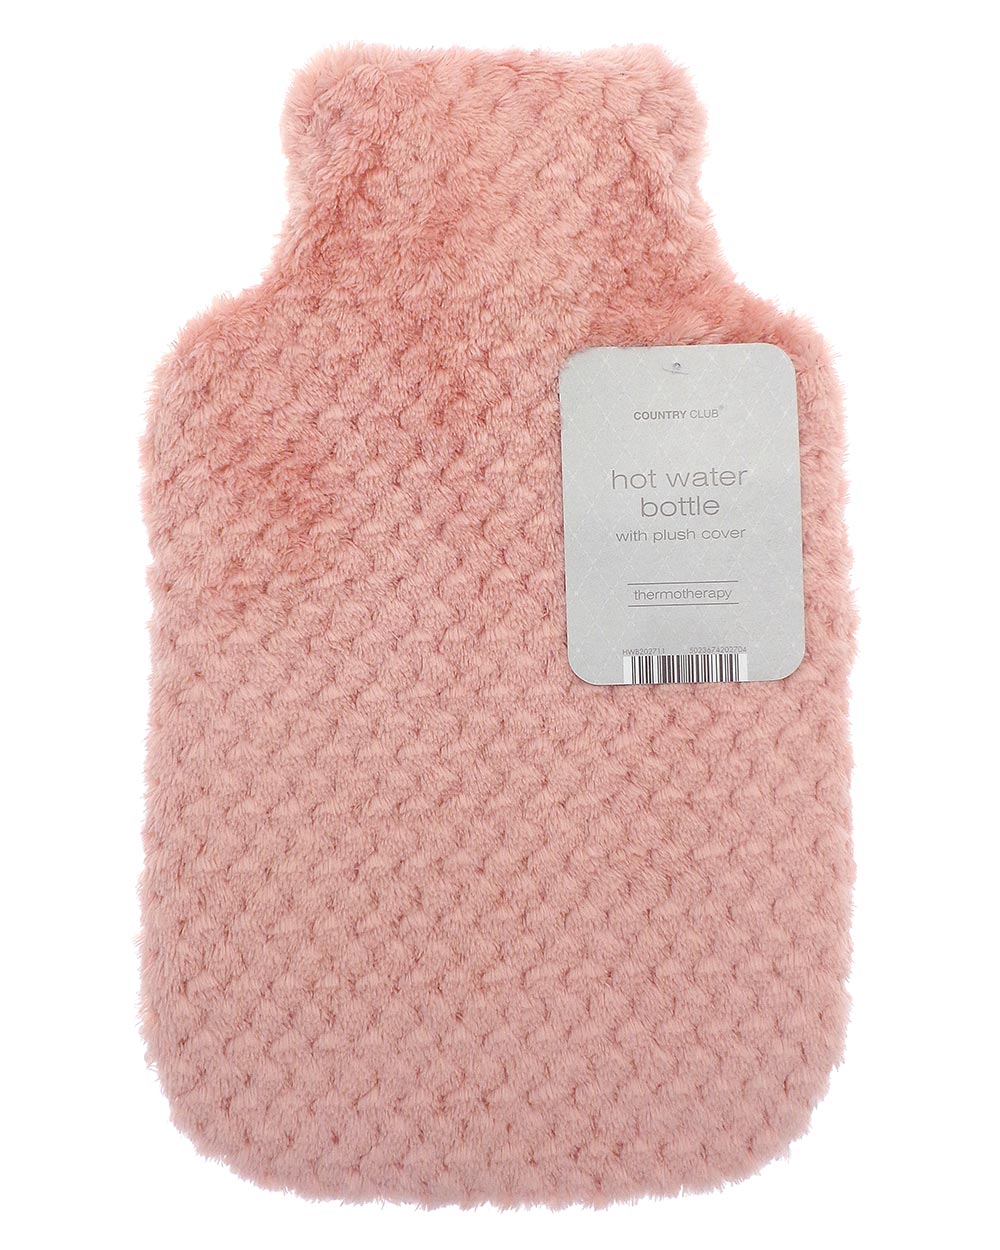 Hot Water Bottle Plush Popcorn Cover, Pink